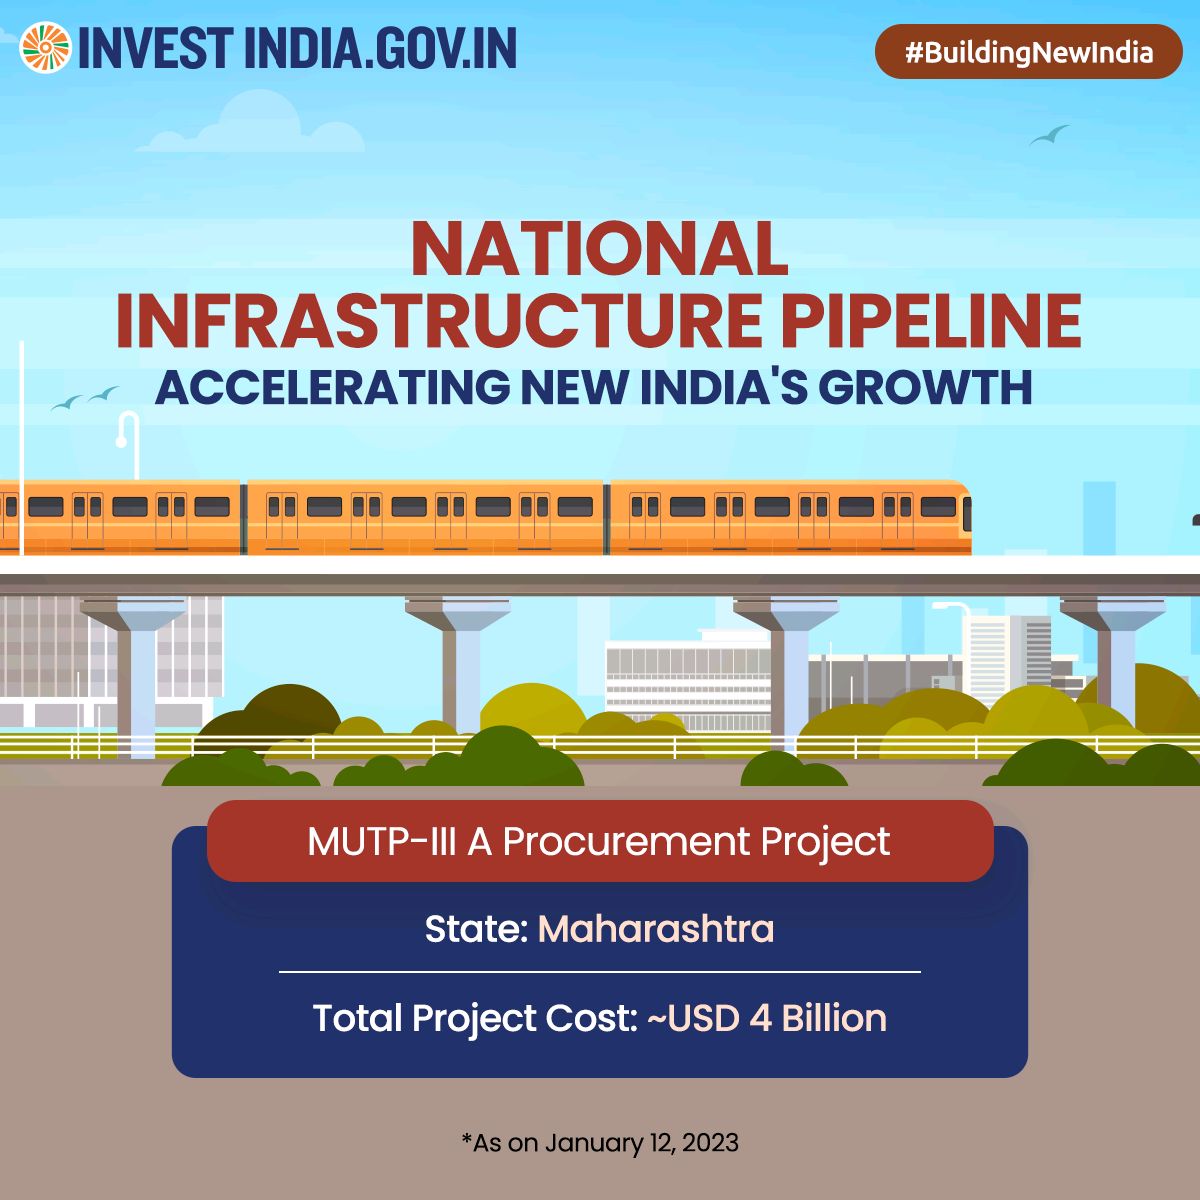 MUTP-III A Procurement Project aims to provide sustainable, high-capacity and safe cross-regional connectivity in Mumbai Metropolitan Region (MMR).

Discover more: bit.ly/page_NIP

#NationalInfrastructurePipeline 
#Nikhilparmarbjp